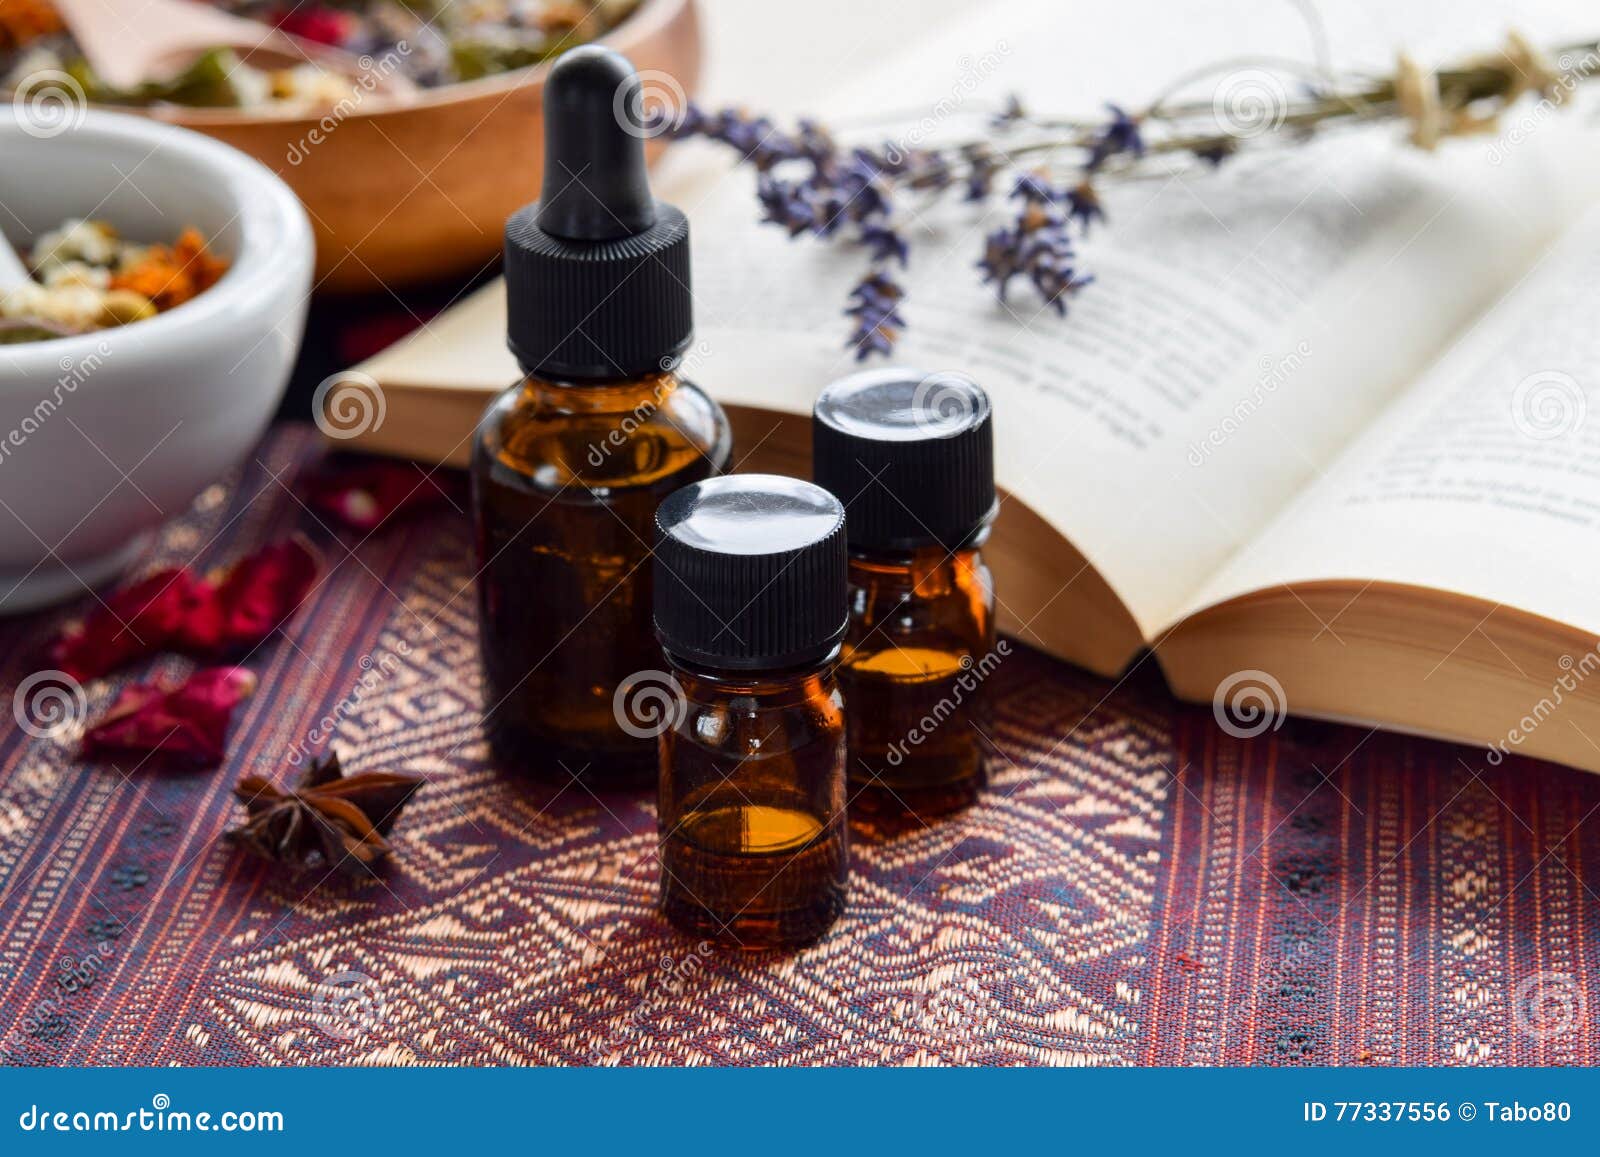 essential oils with herbs and book